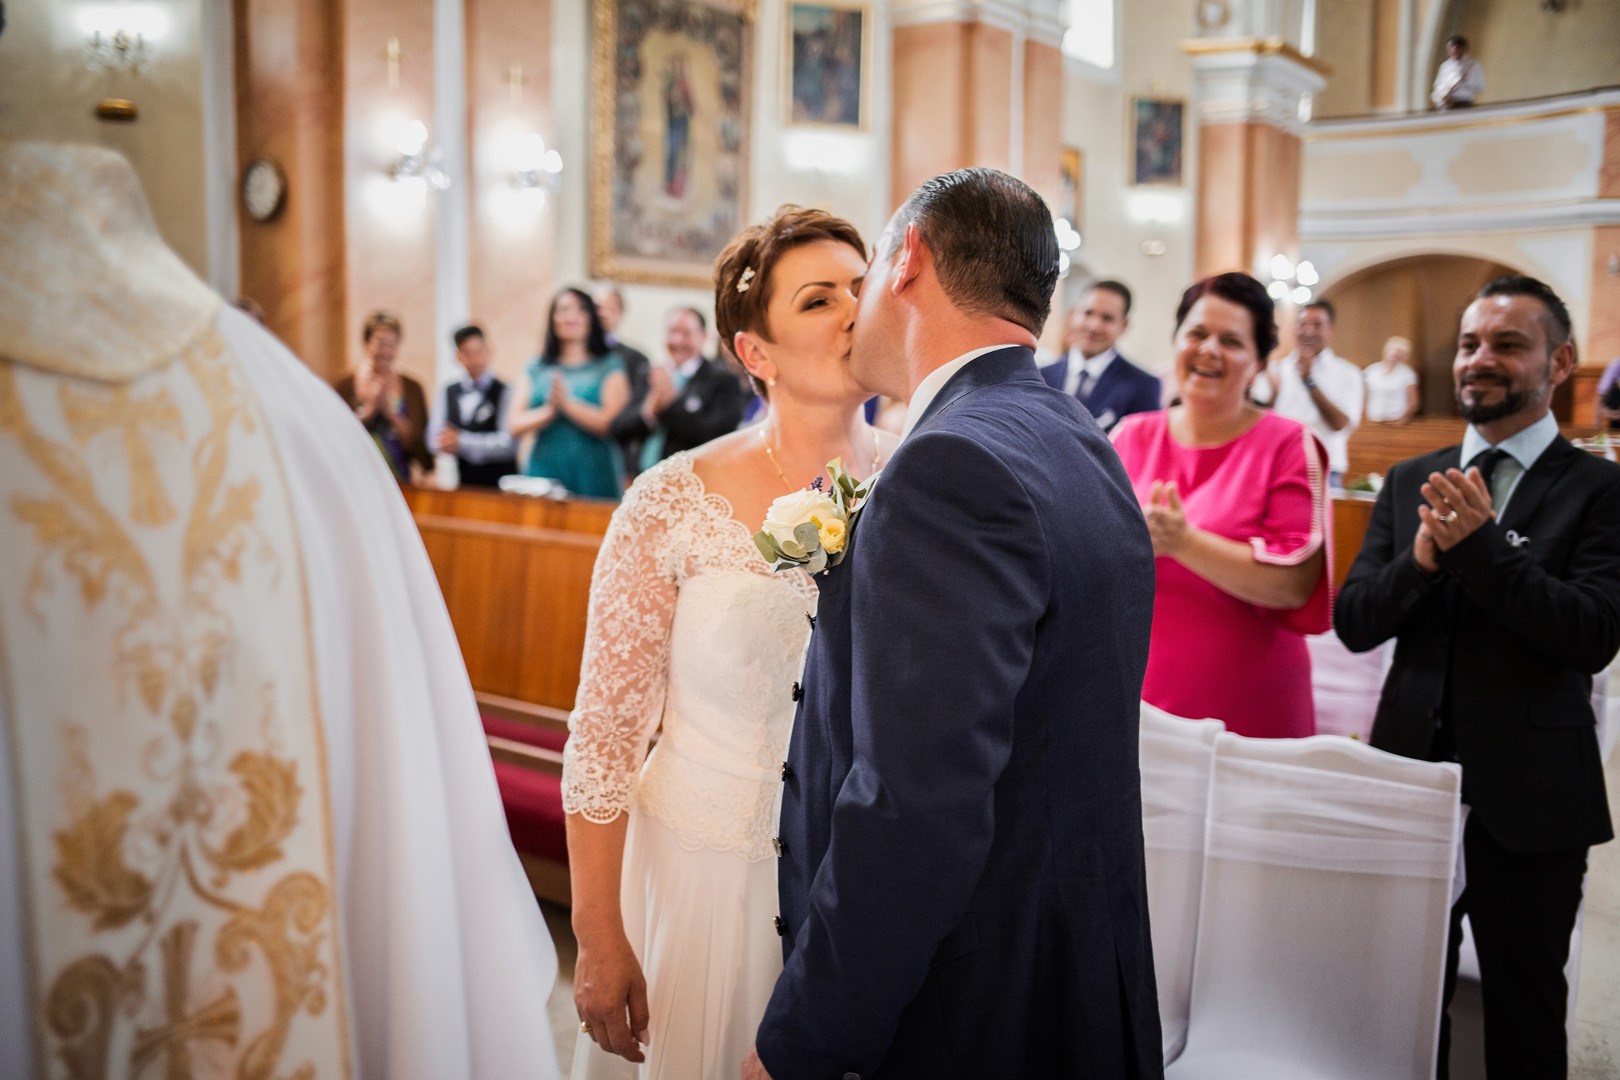 Wedding photos from the Slovak-Italian wedding of Mirka and Baldy in the beautiful surroundings of the Gbeľany Manor House - 0091.jpg